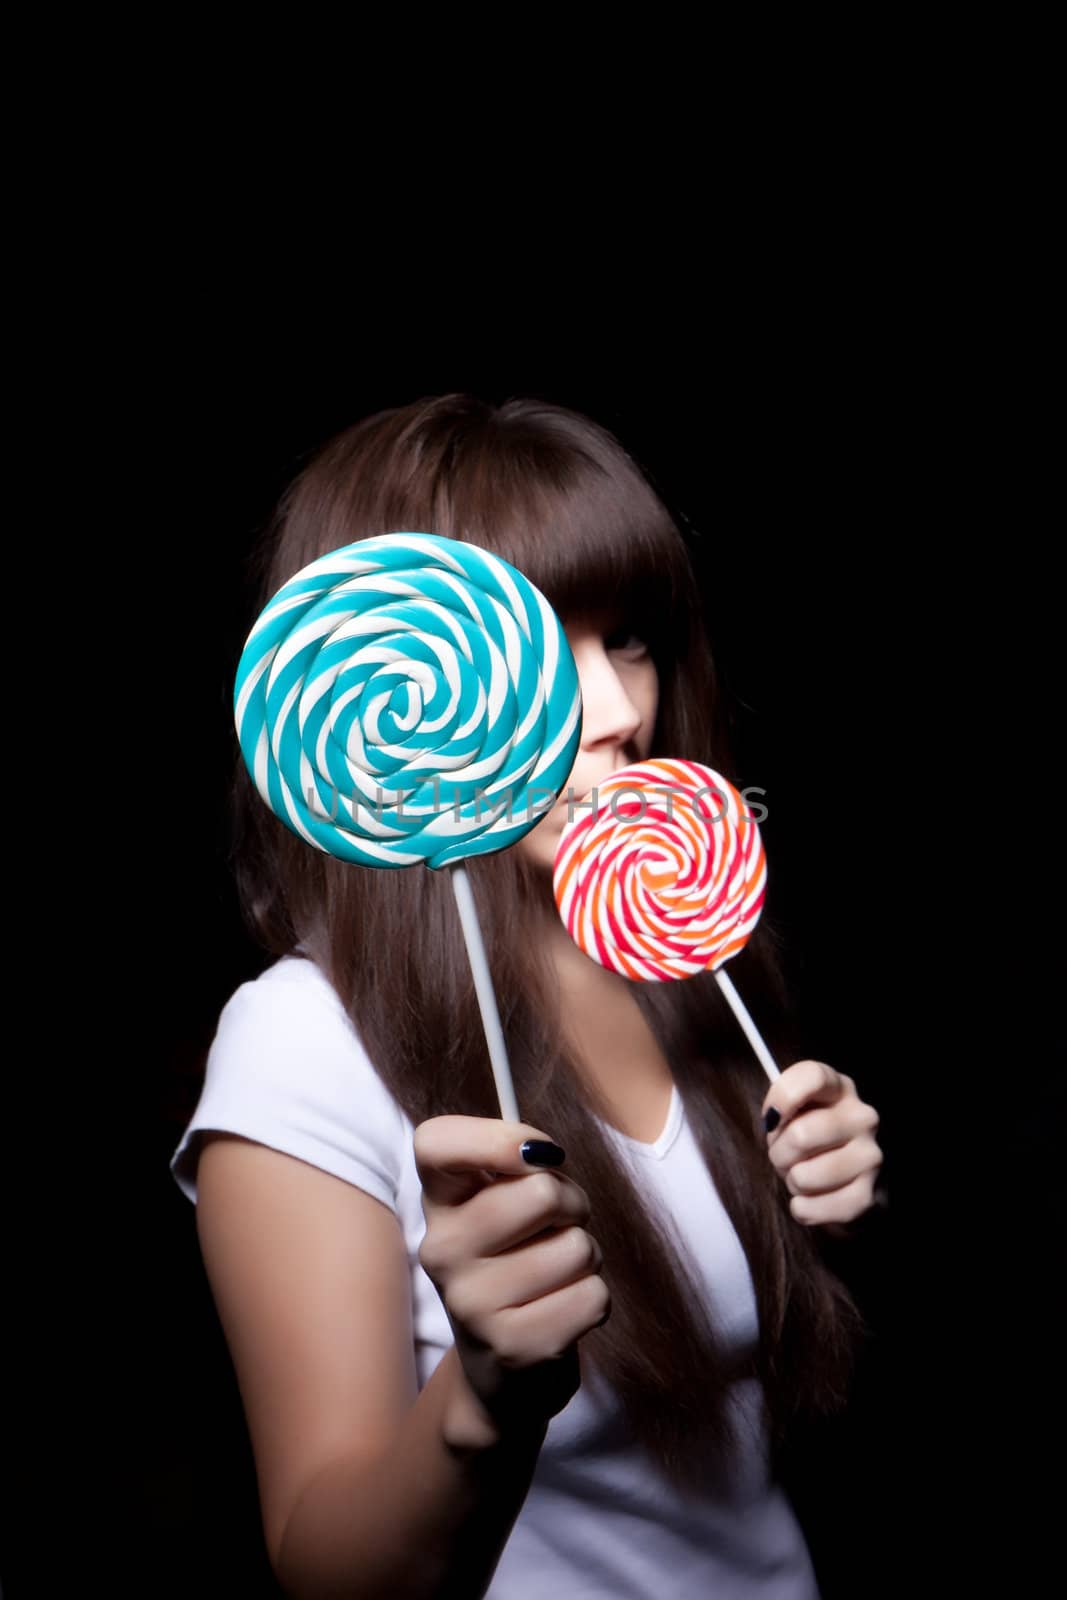 
young woman with lolipop, black background